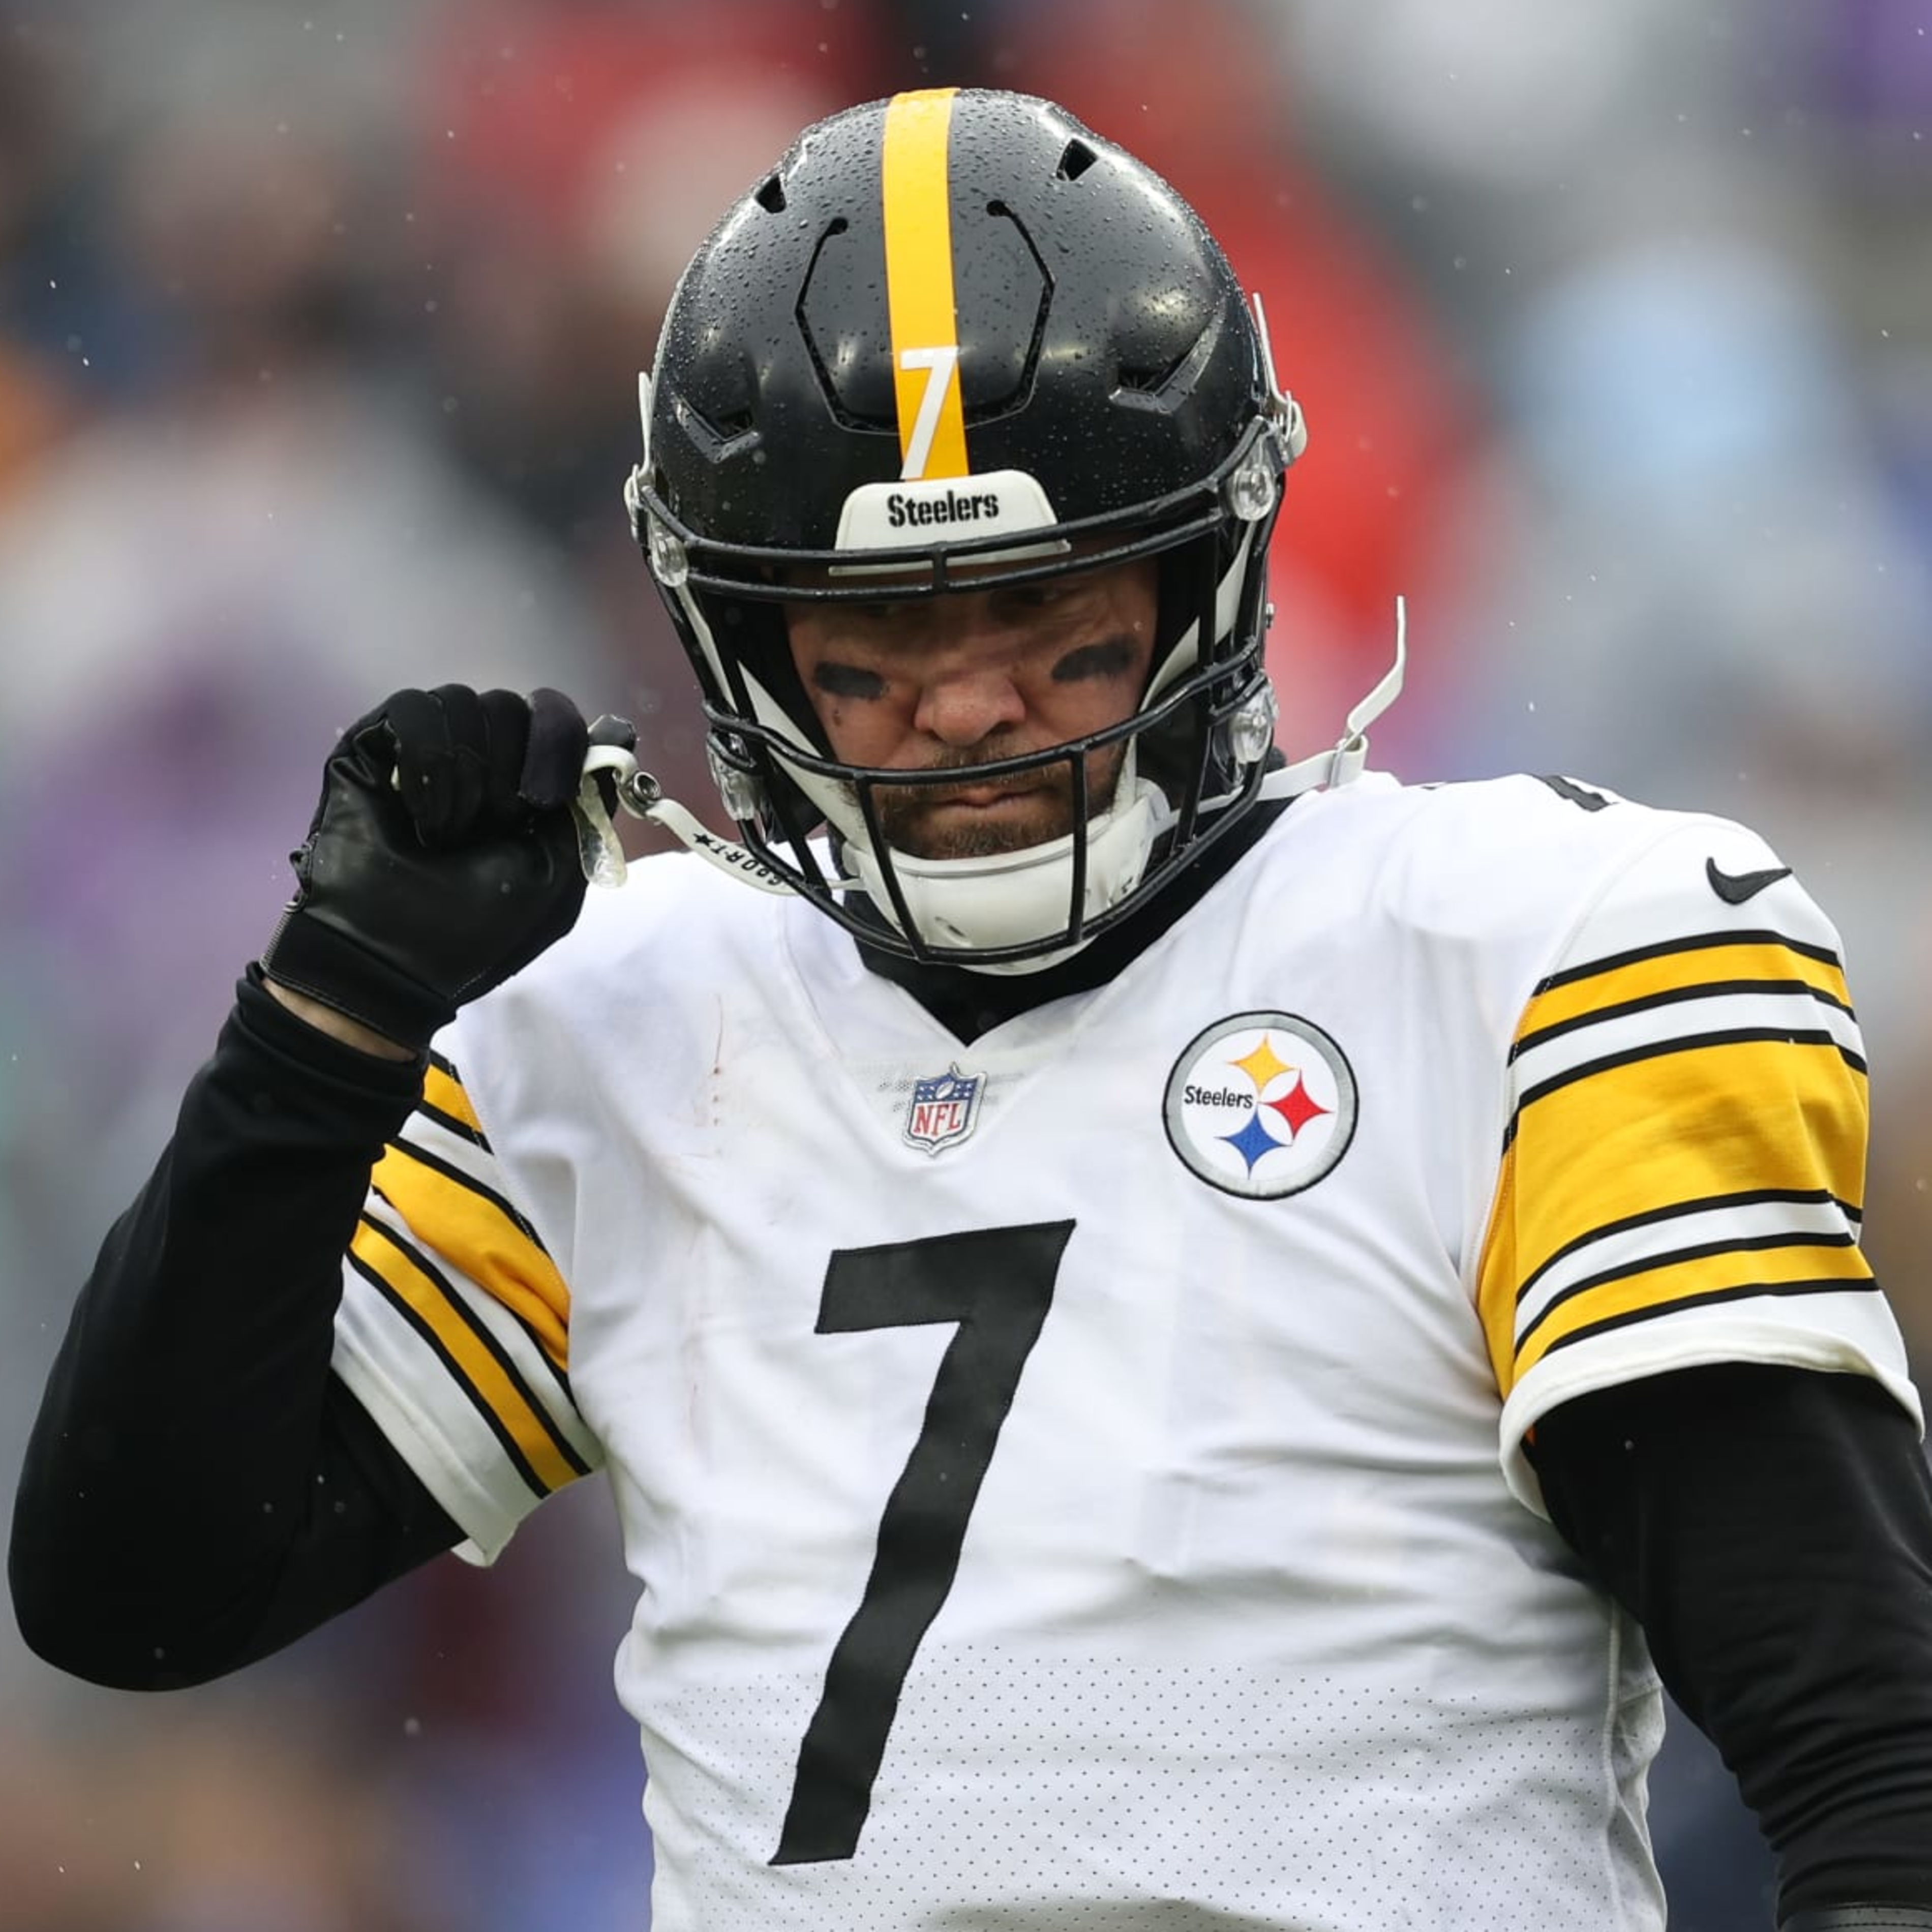 Ben Roethlisberger: NFL Players ‘Turned from a Team-First to a Me-Type Attitude’